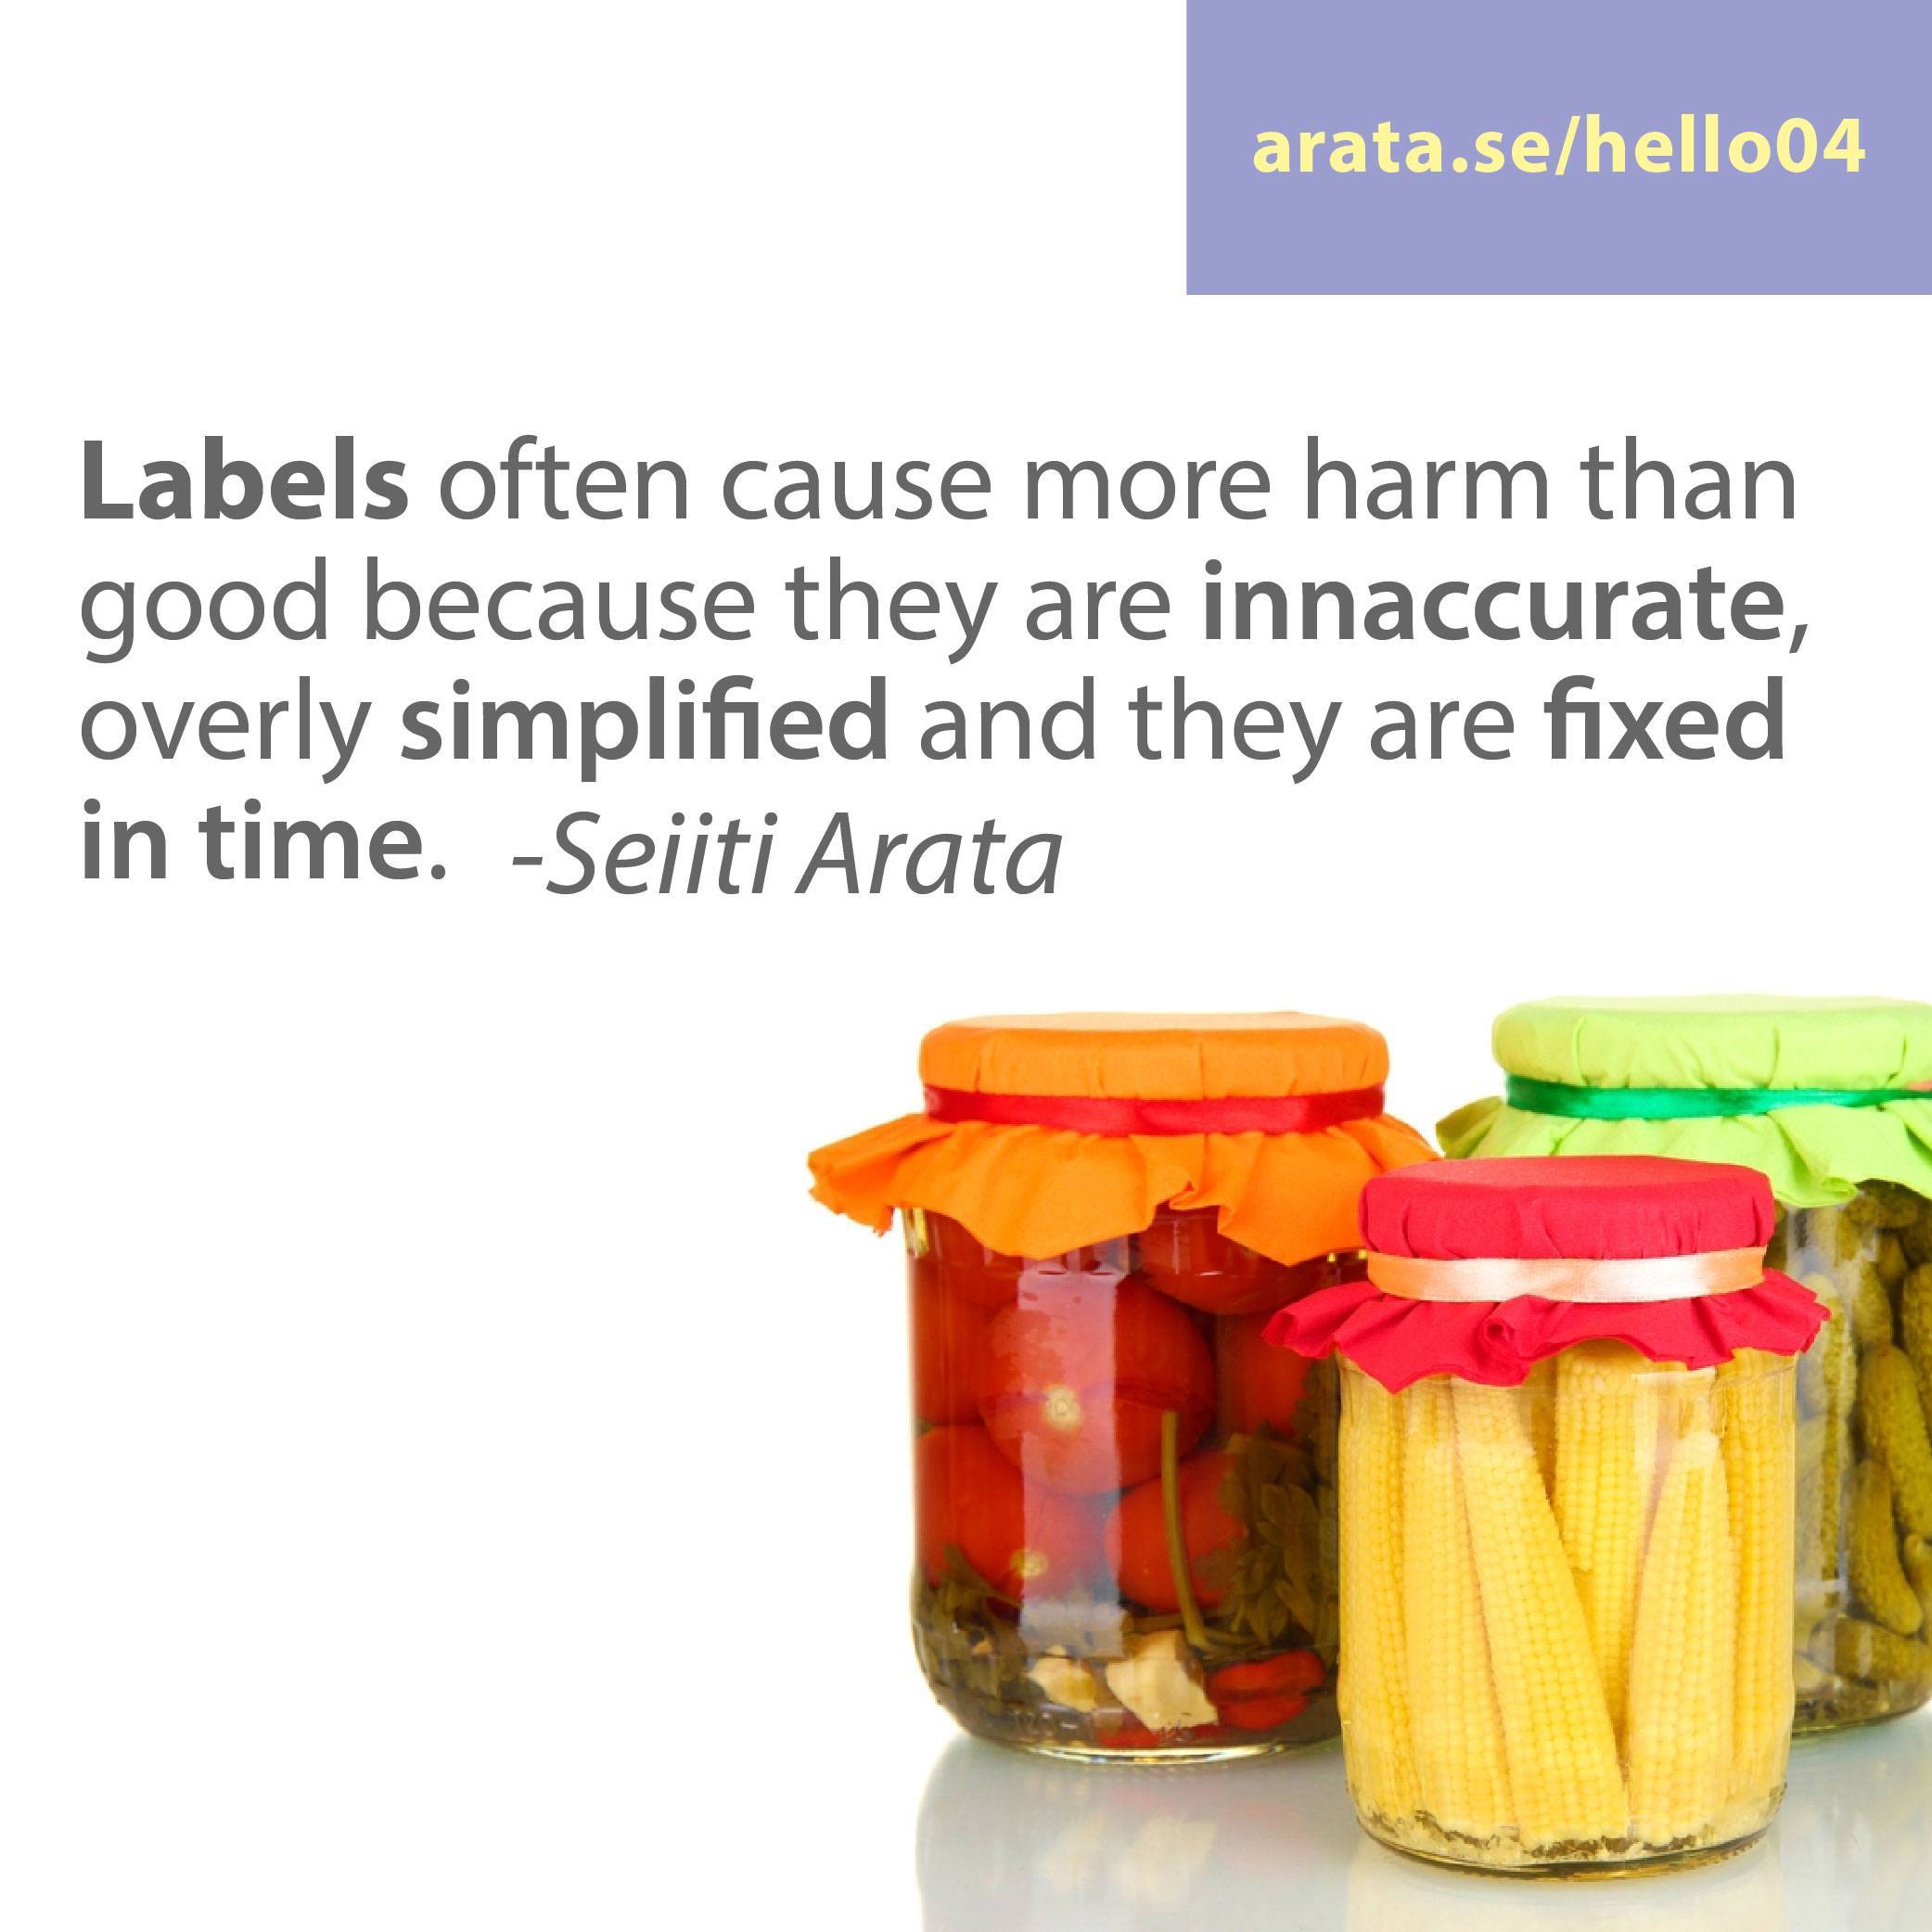 Don't label: Labels often cause more harm than good because they are innaccurate, overly simplified and they are fixed in time.